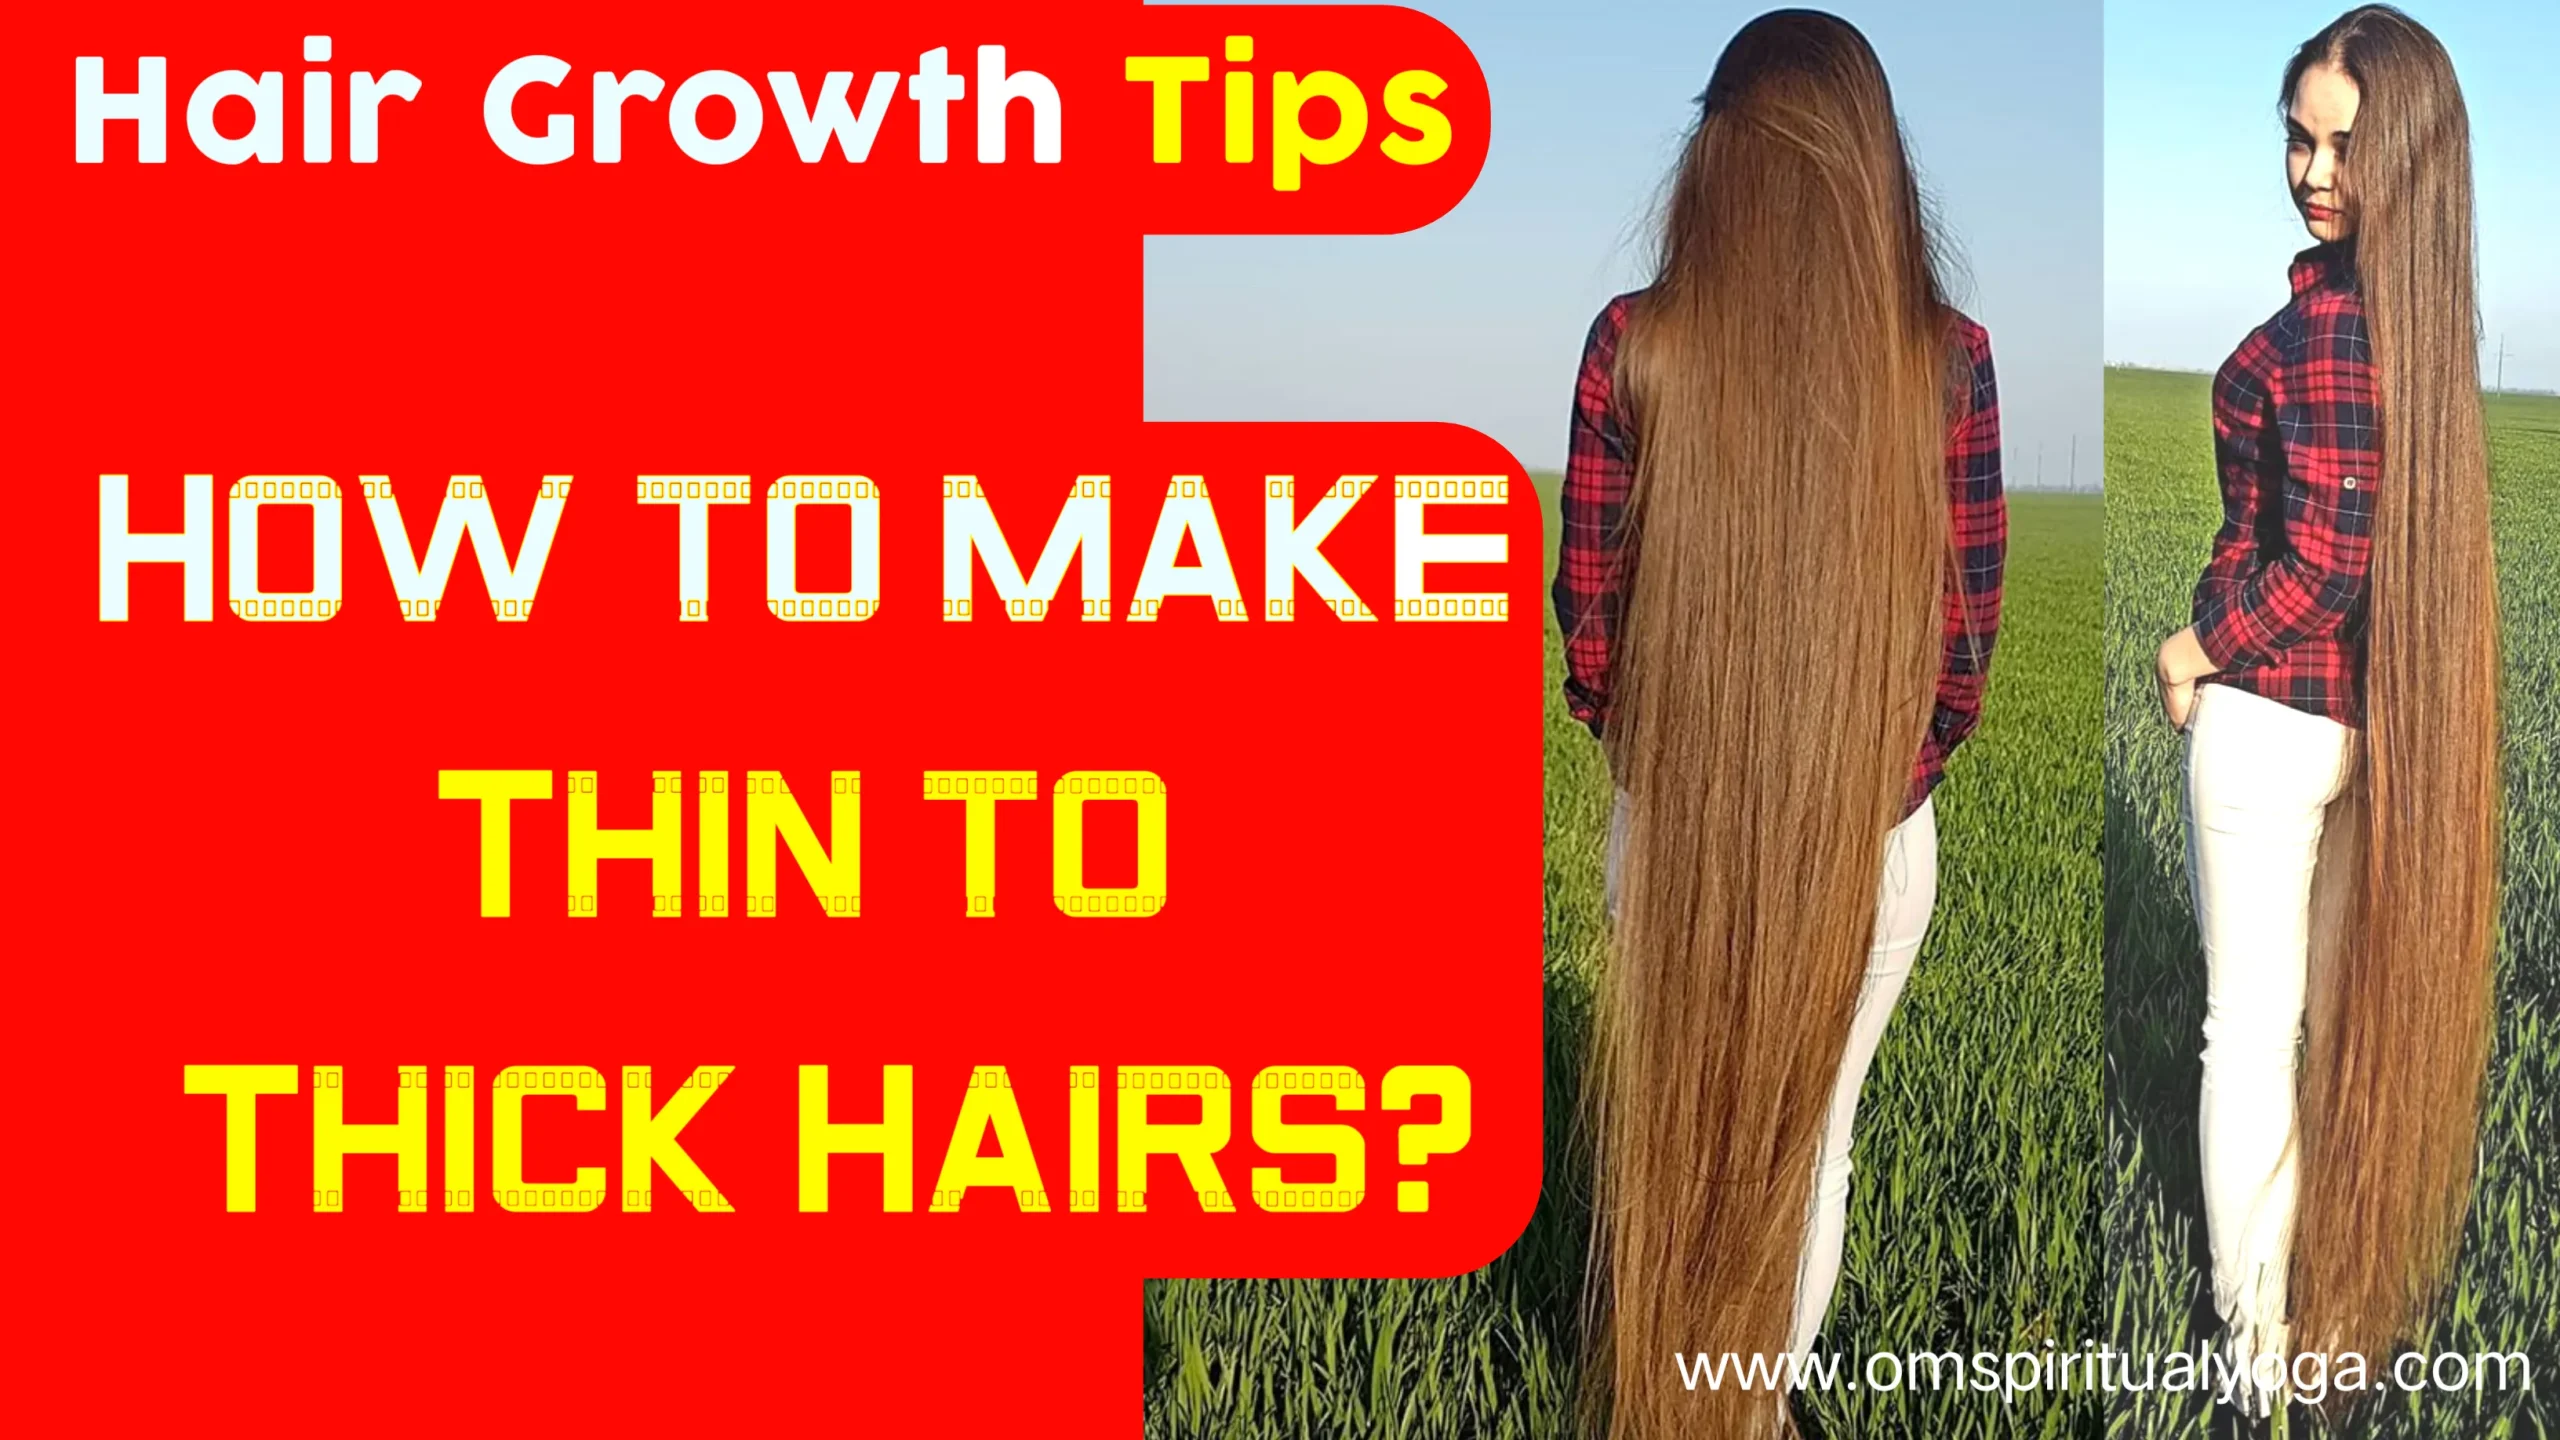 Hair Growth Tips How To Make Thin To Thick Hairs